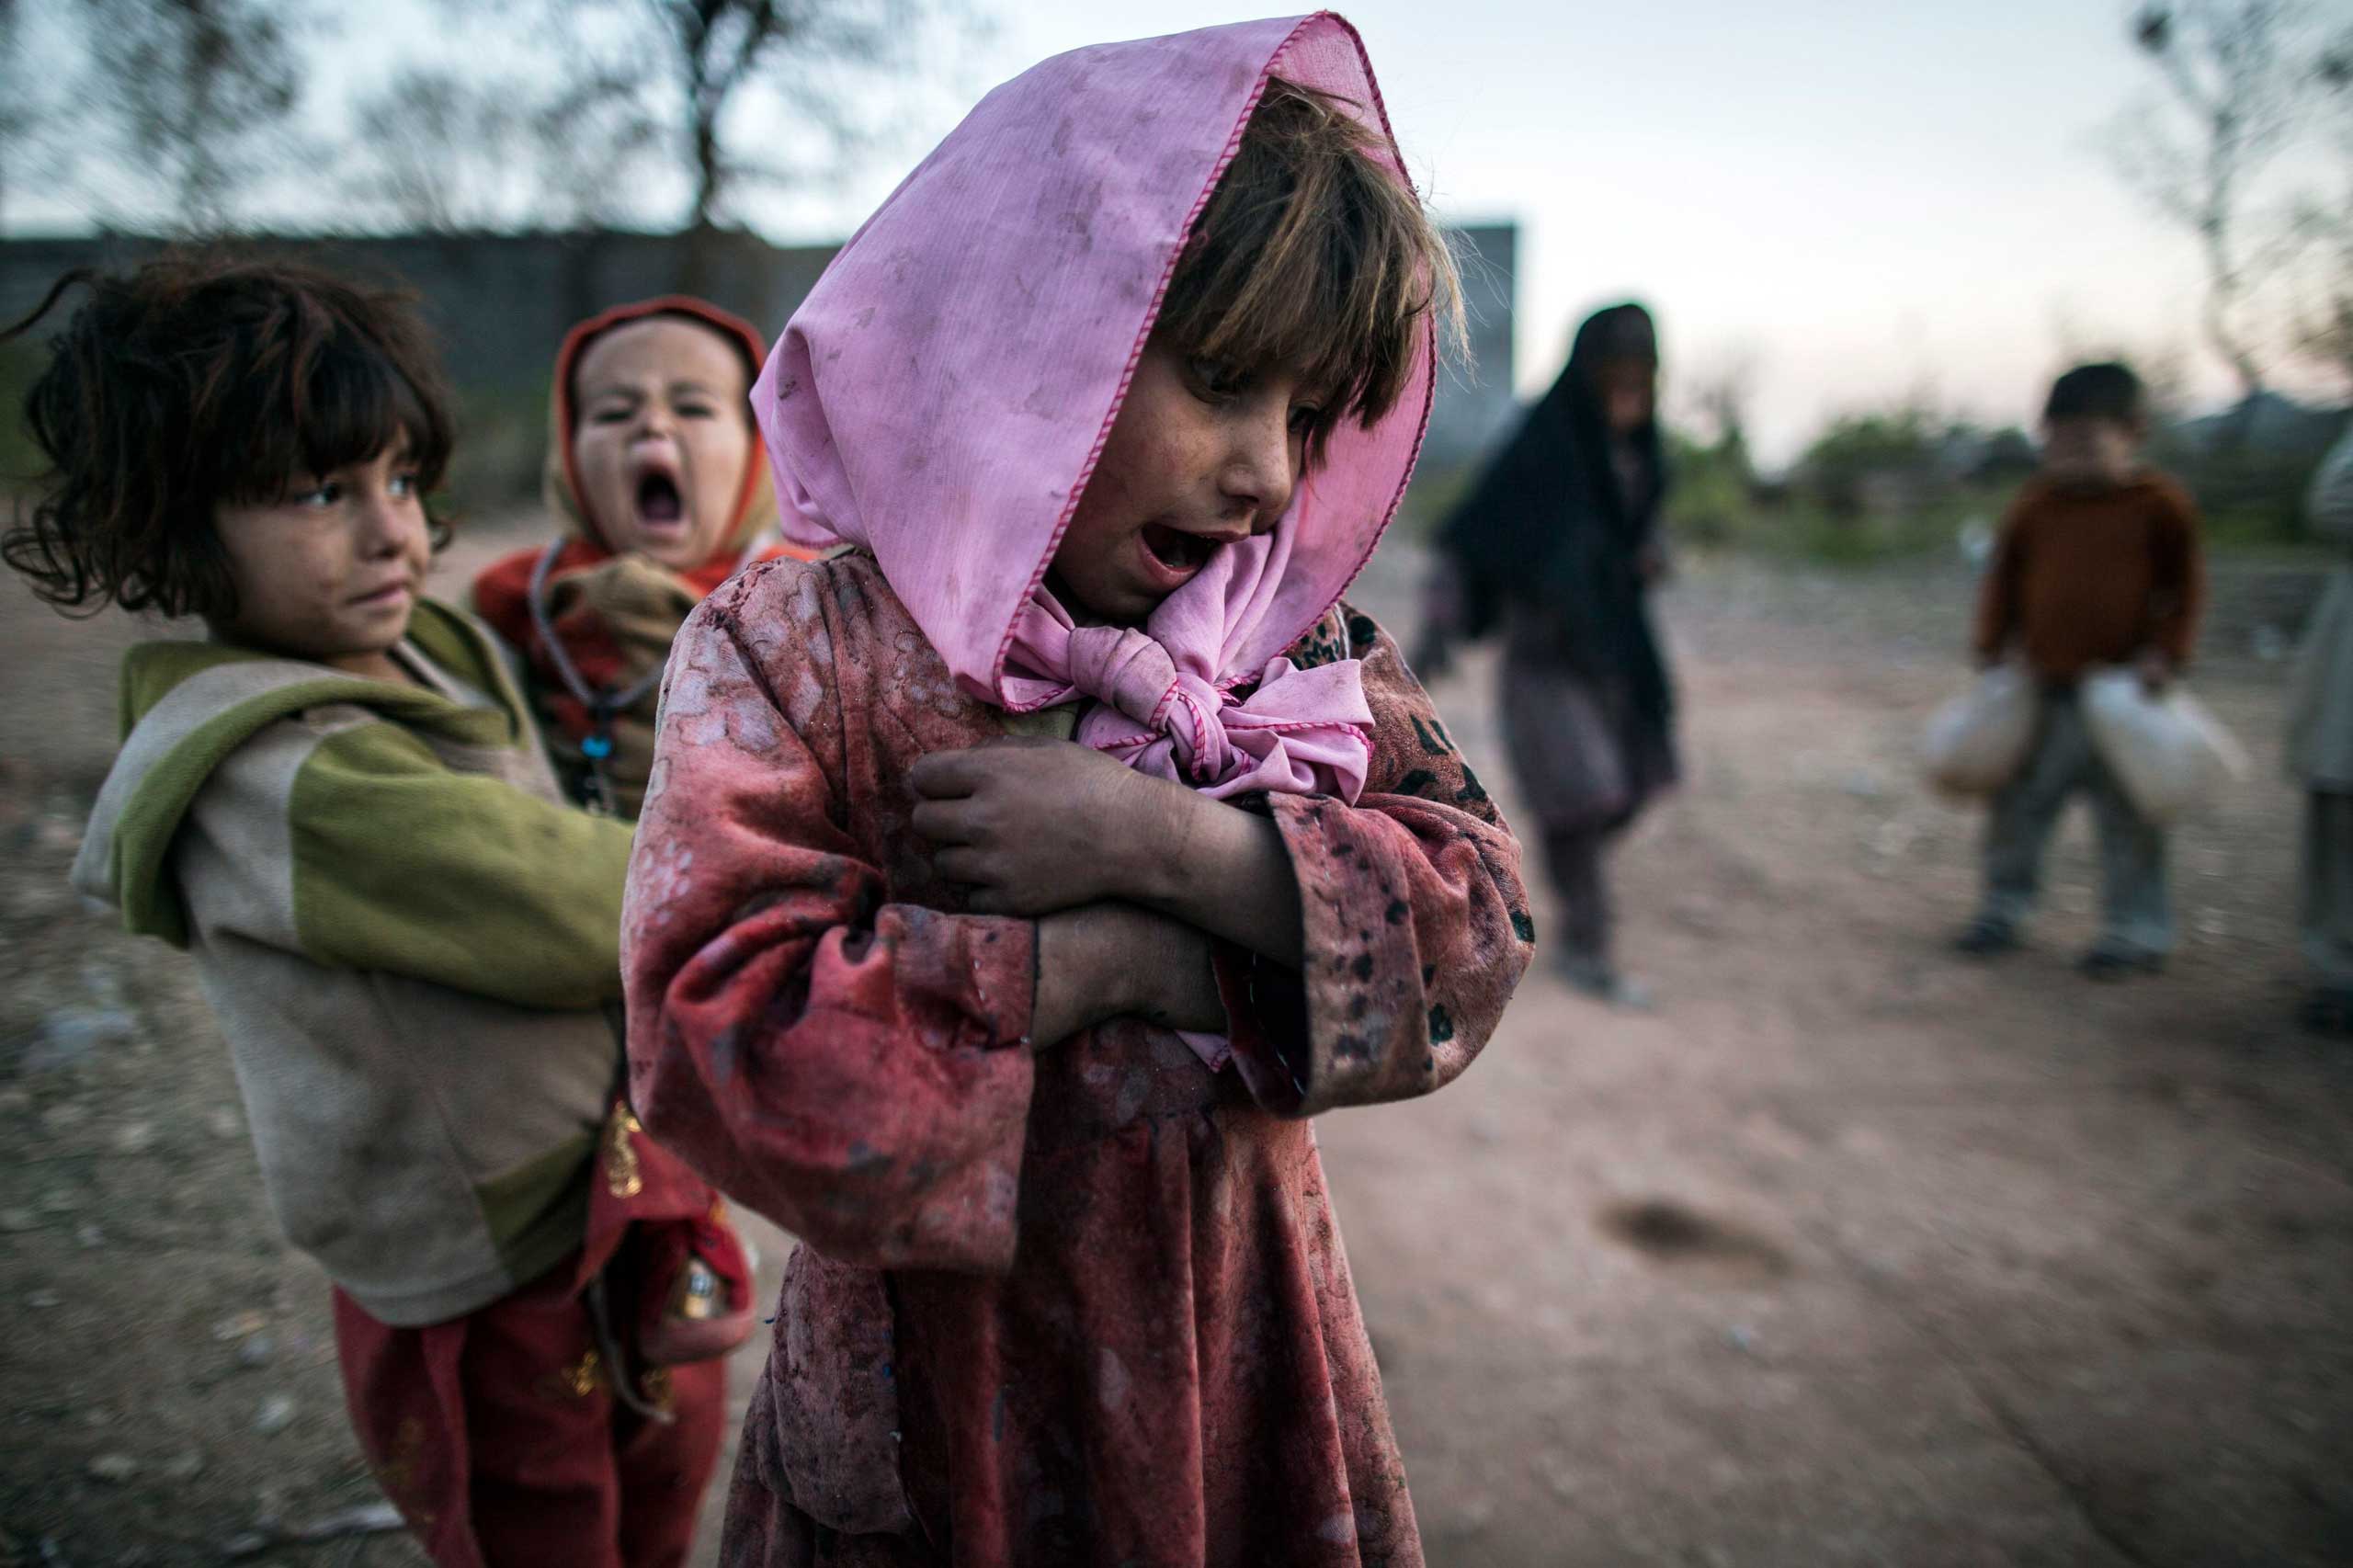 Feb. 11, 2015. A girl reacts as she watches her friend play hopscotch on the outskirts of Islamabad, Pakistan.